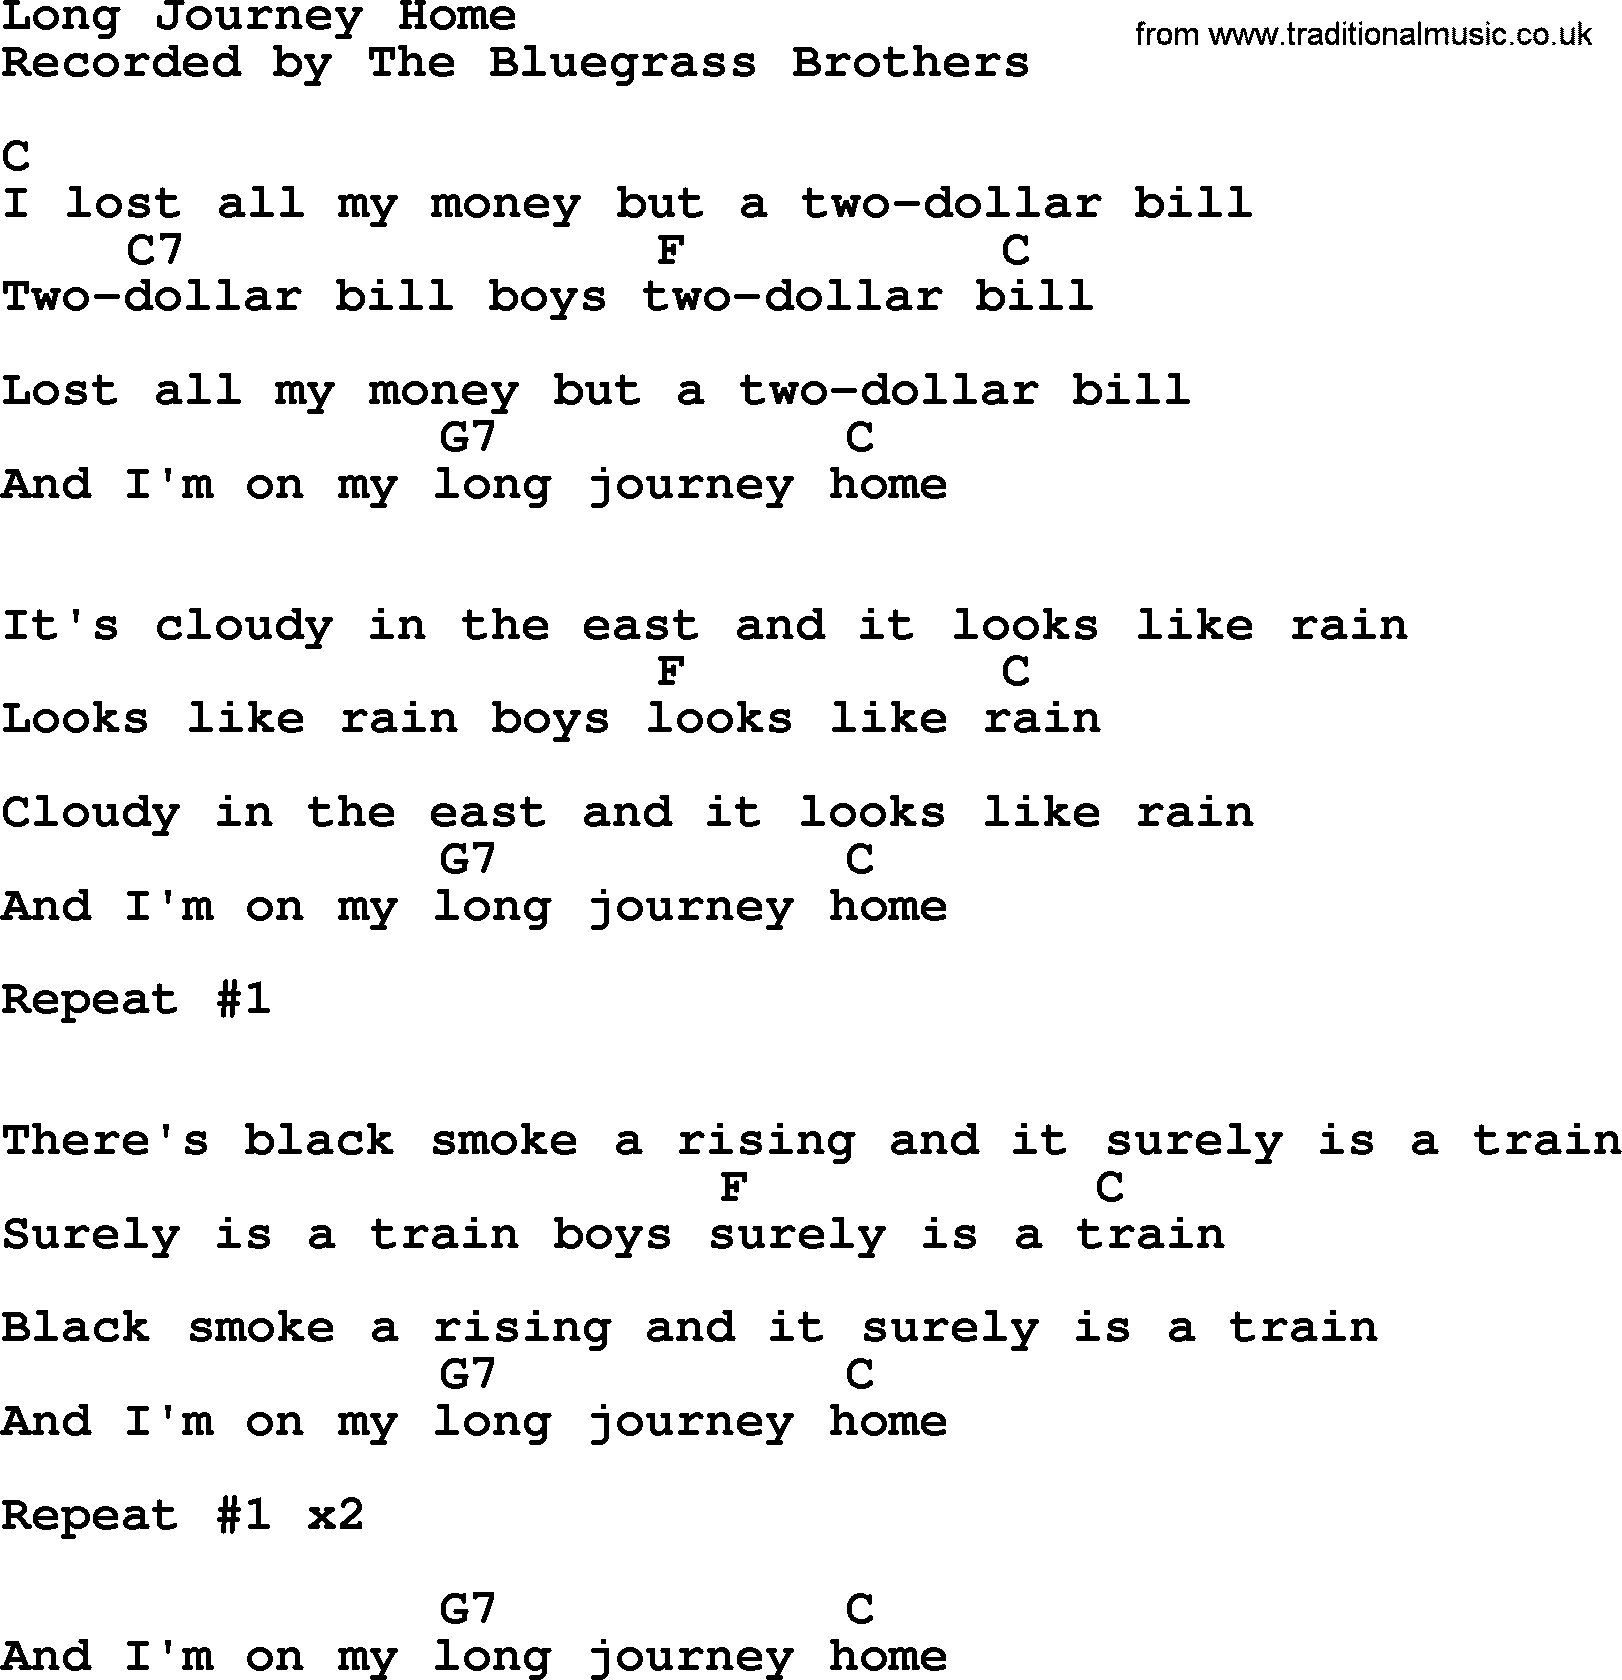 Bluegrass song: Long Journey Home, lyrics and chords